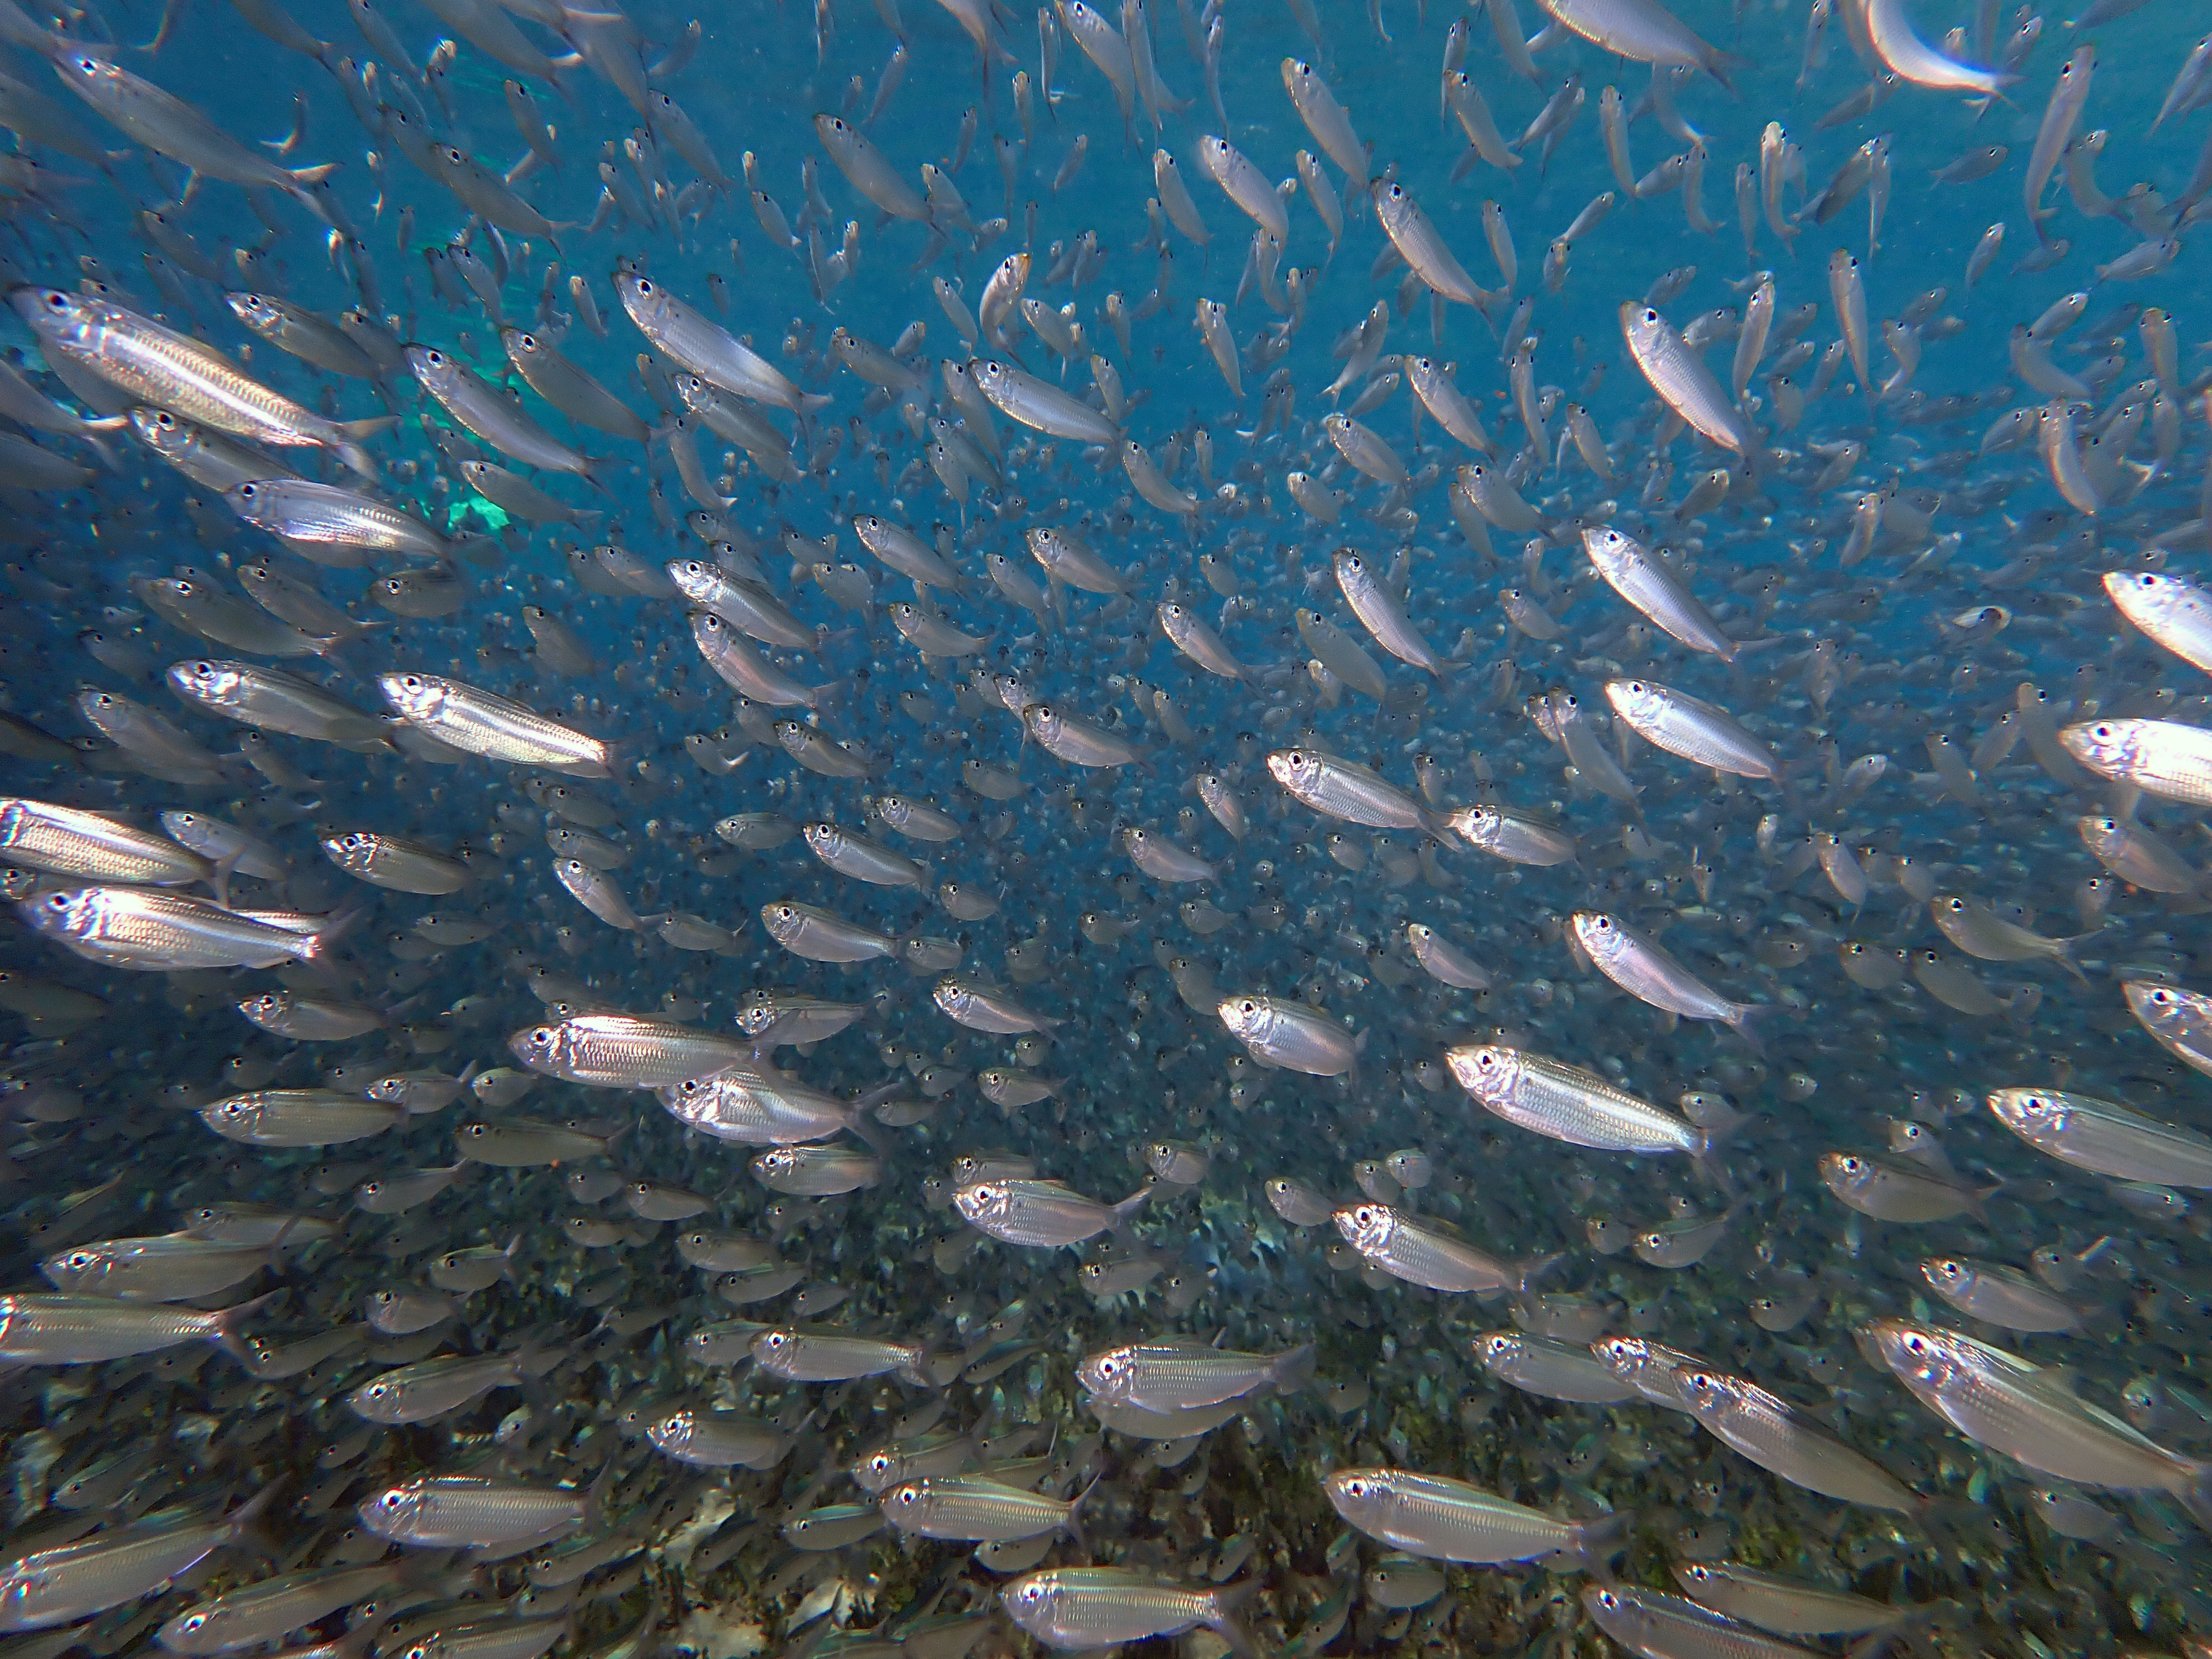 small silver schooling fish. Likely anchovies.